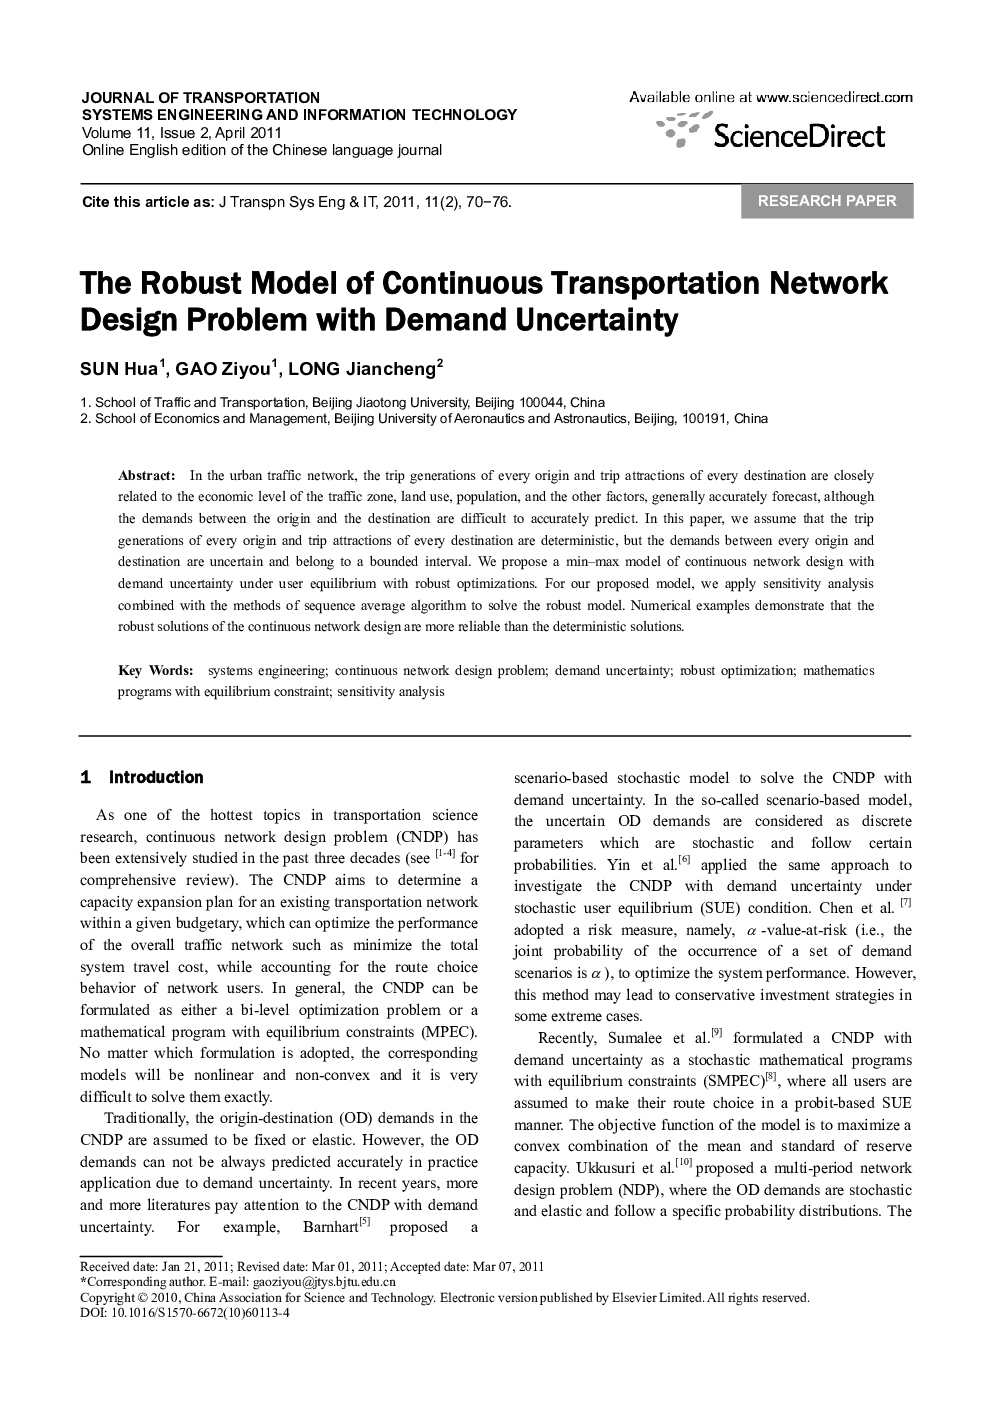 The Robust Model of Continuous Transportation Network Design Problem with Demand Uncertainty